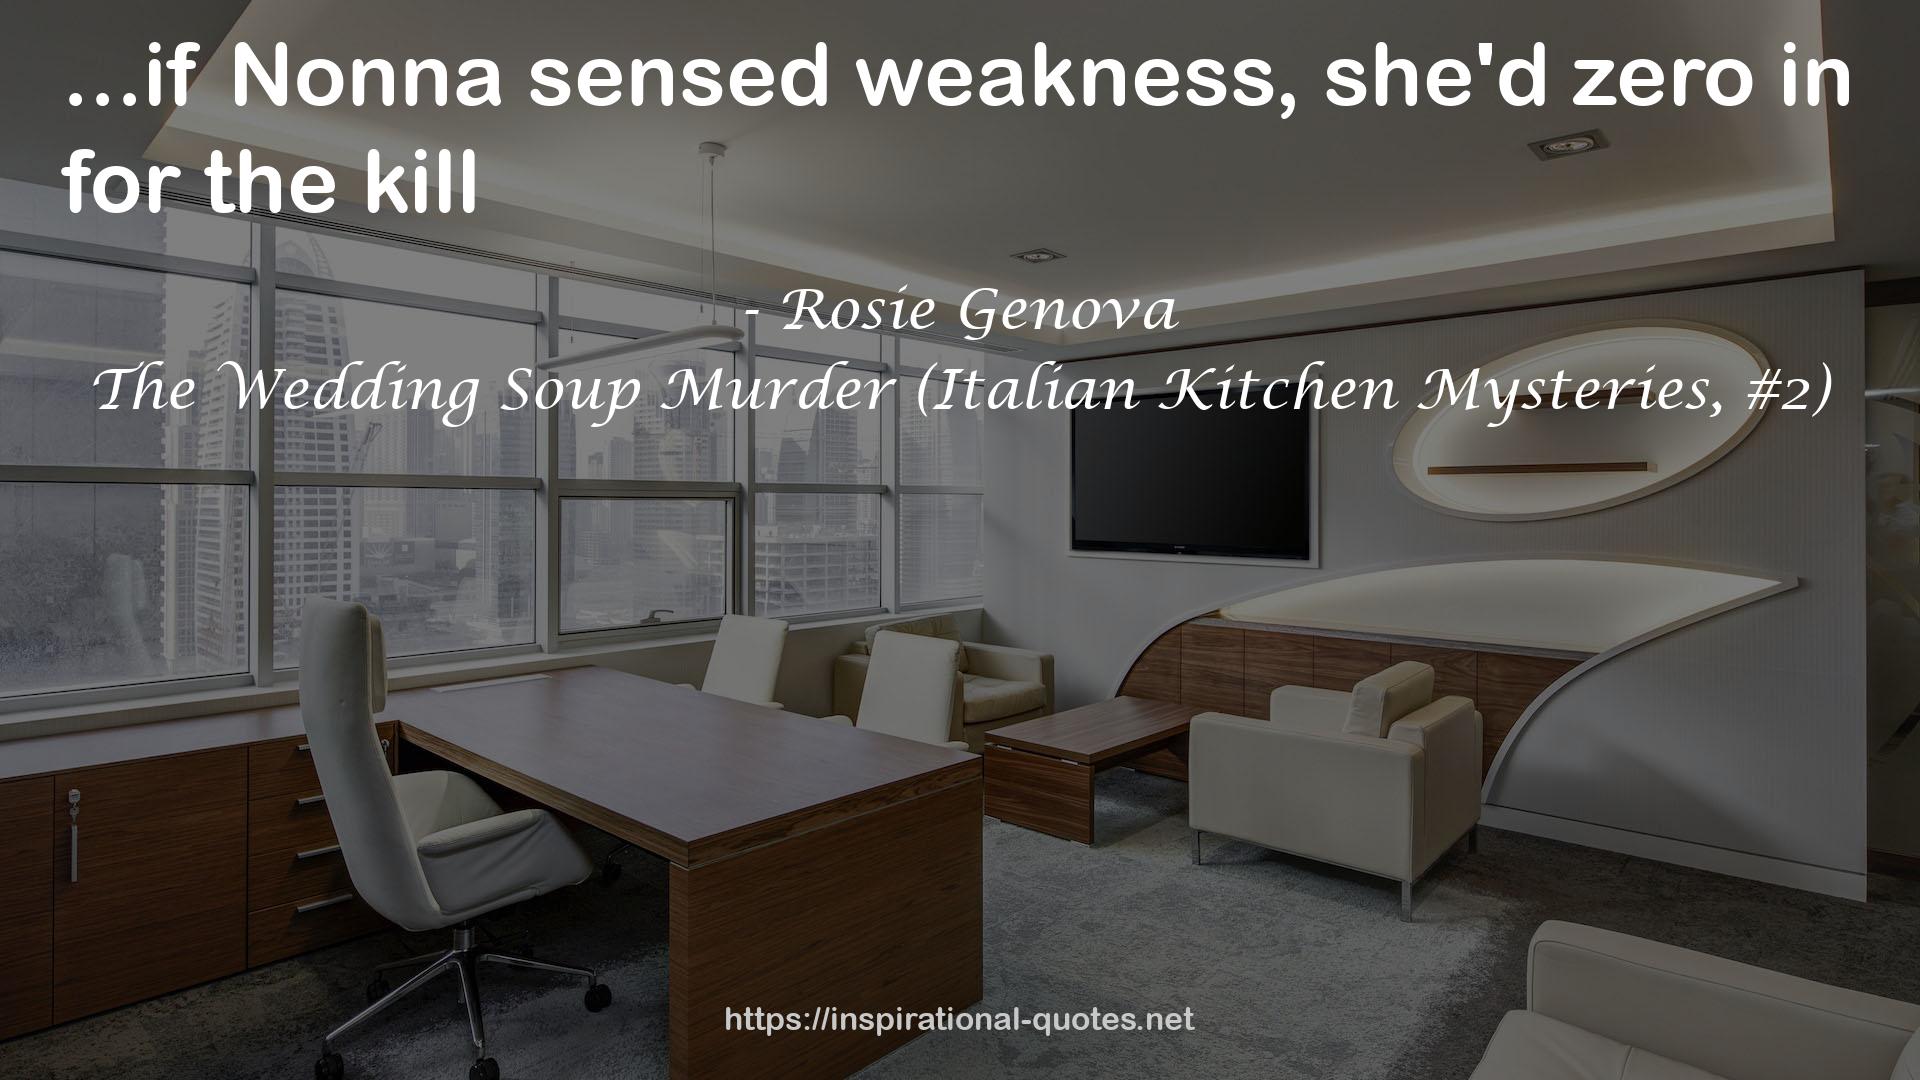 The Wedding Soup Murder (Italian Kitchen Mysteries, #2) QUOTES